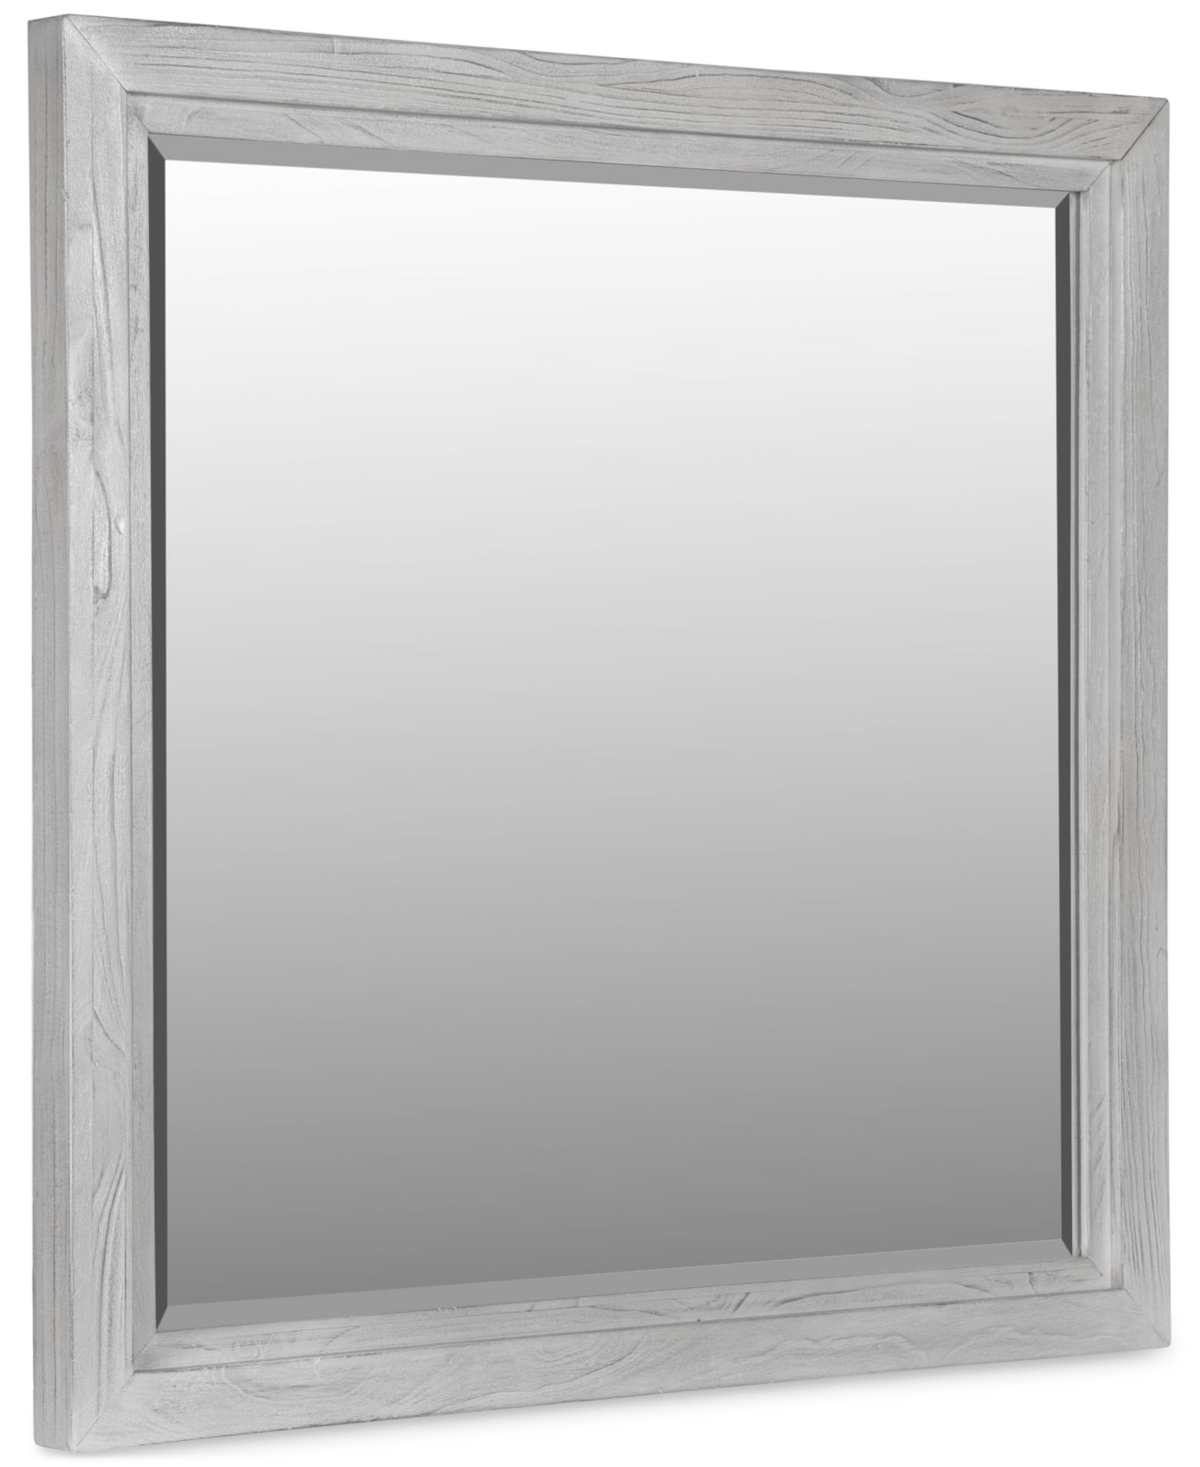 Furniture Boho Chic Mirror In Washed Wht